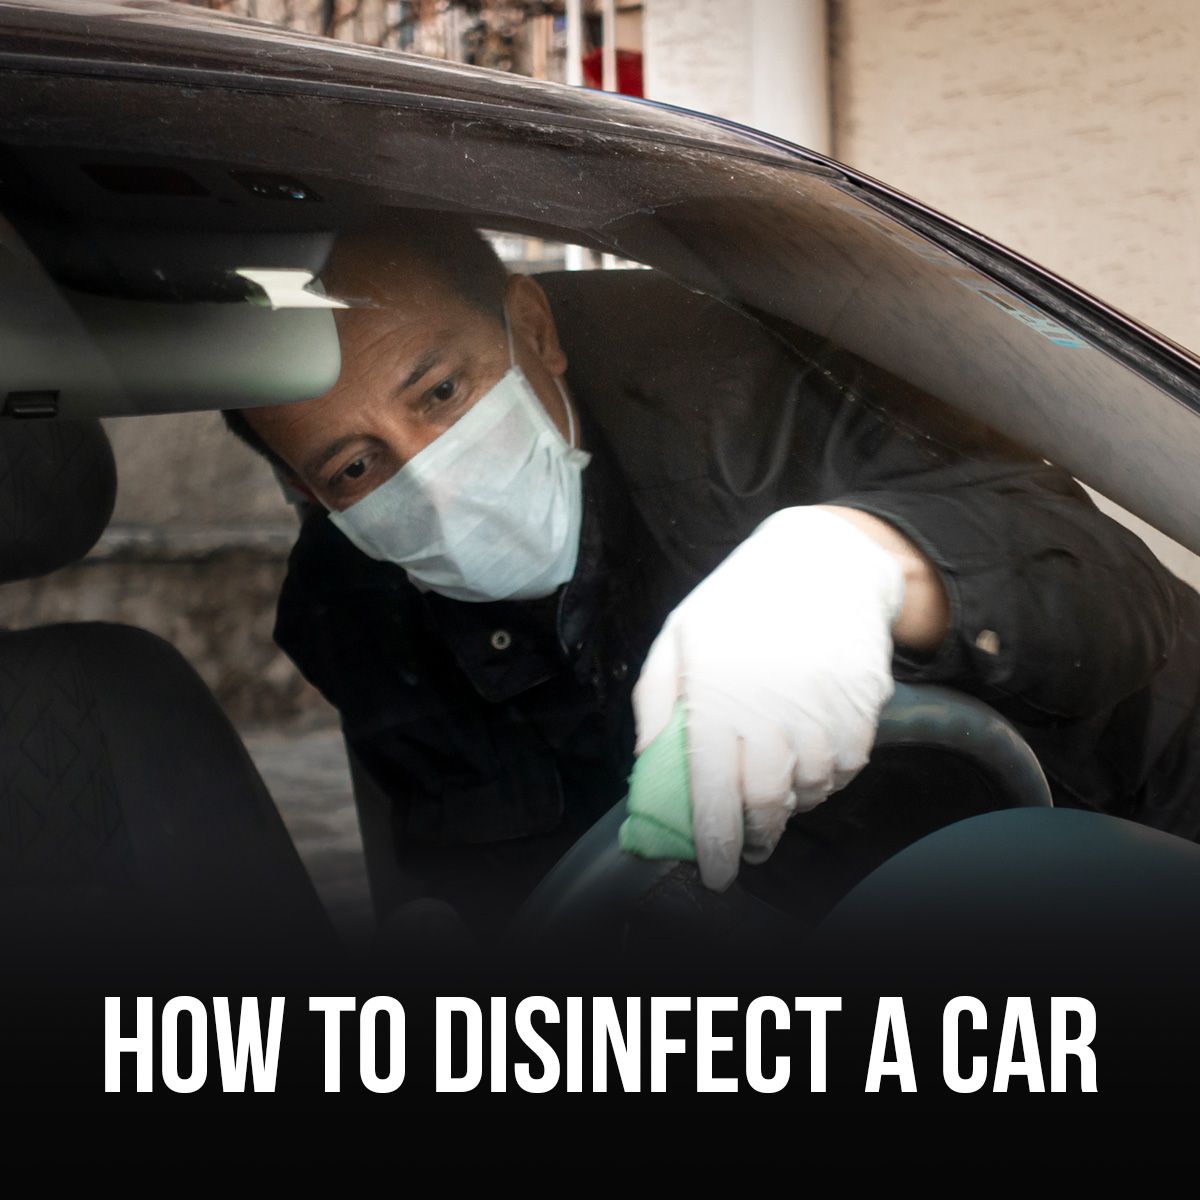 HOW TO DISINFECT A CAR